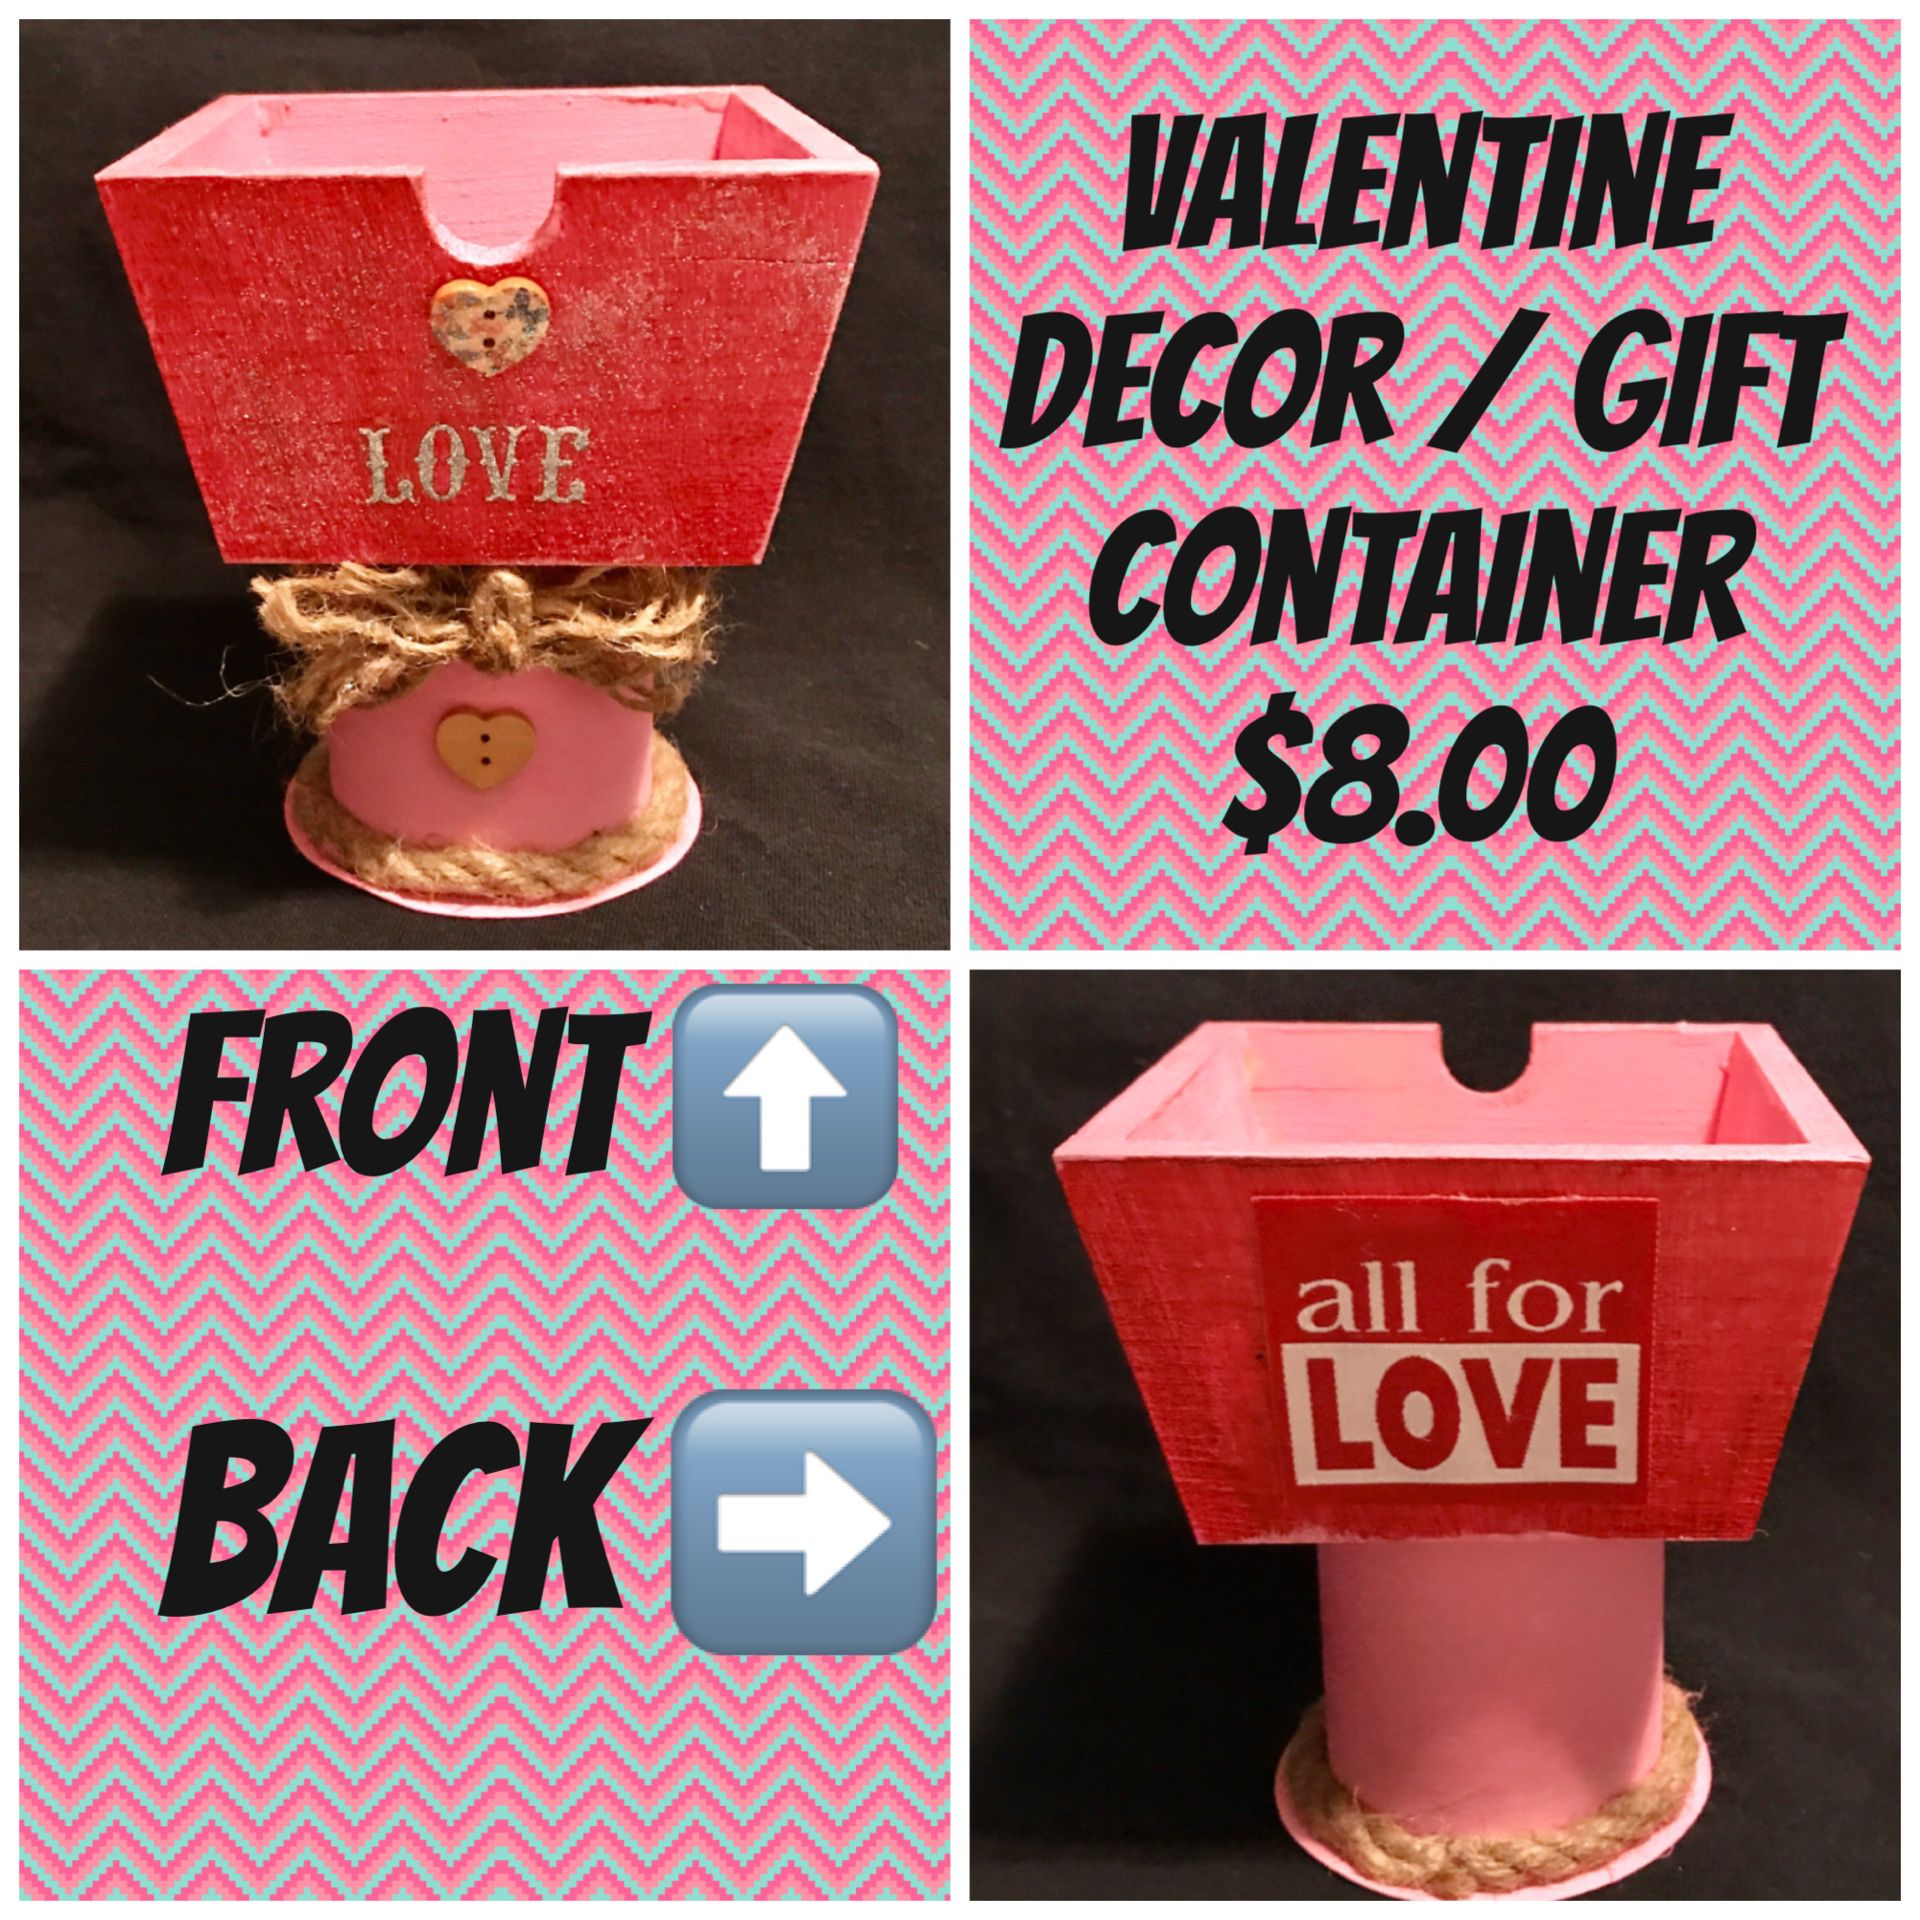 Valentine Decor / candy container